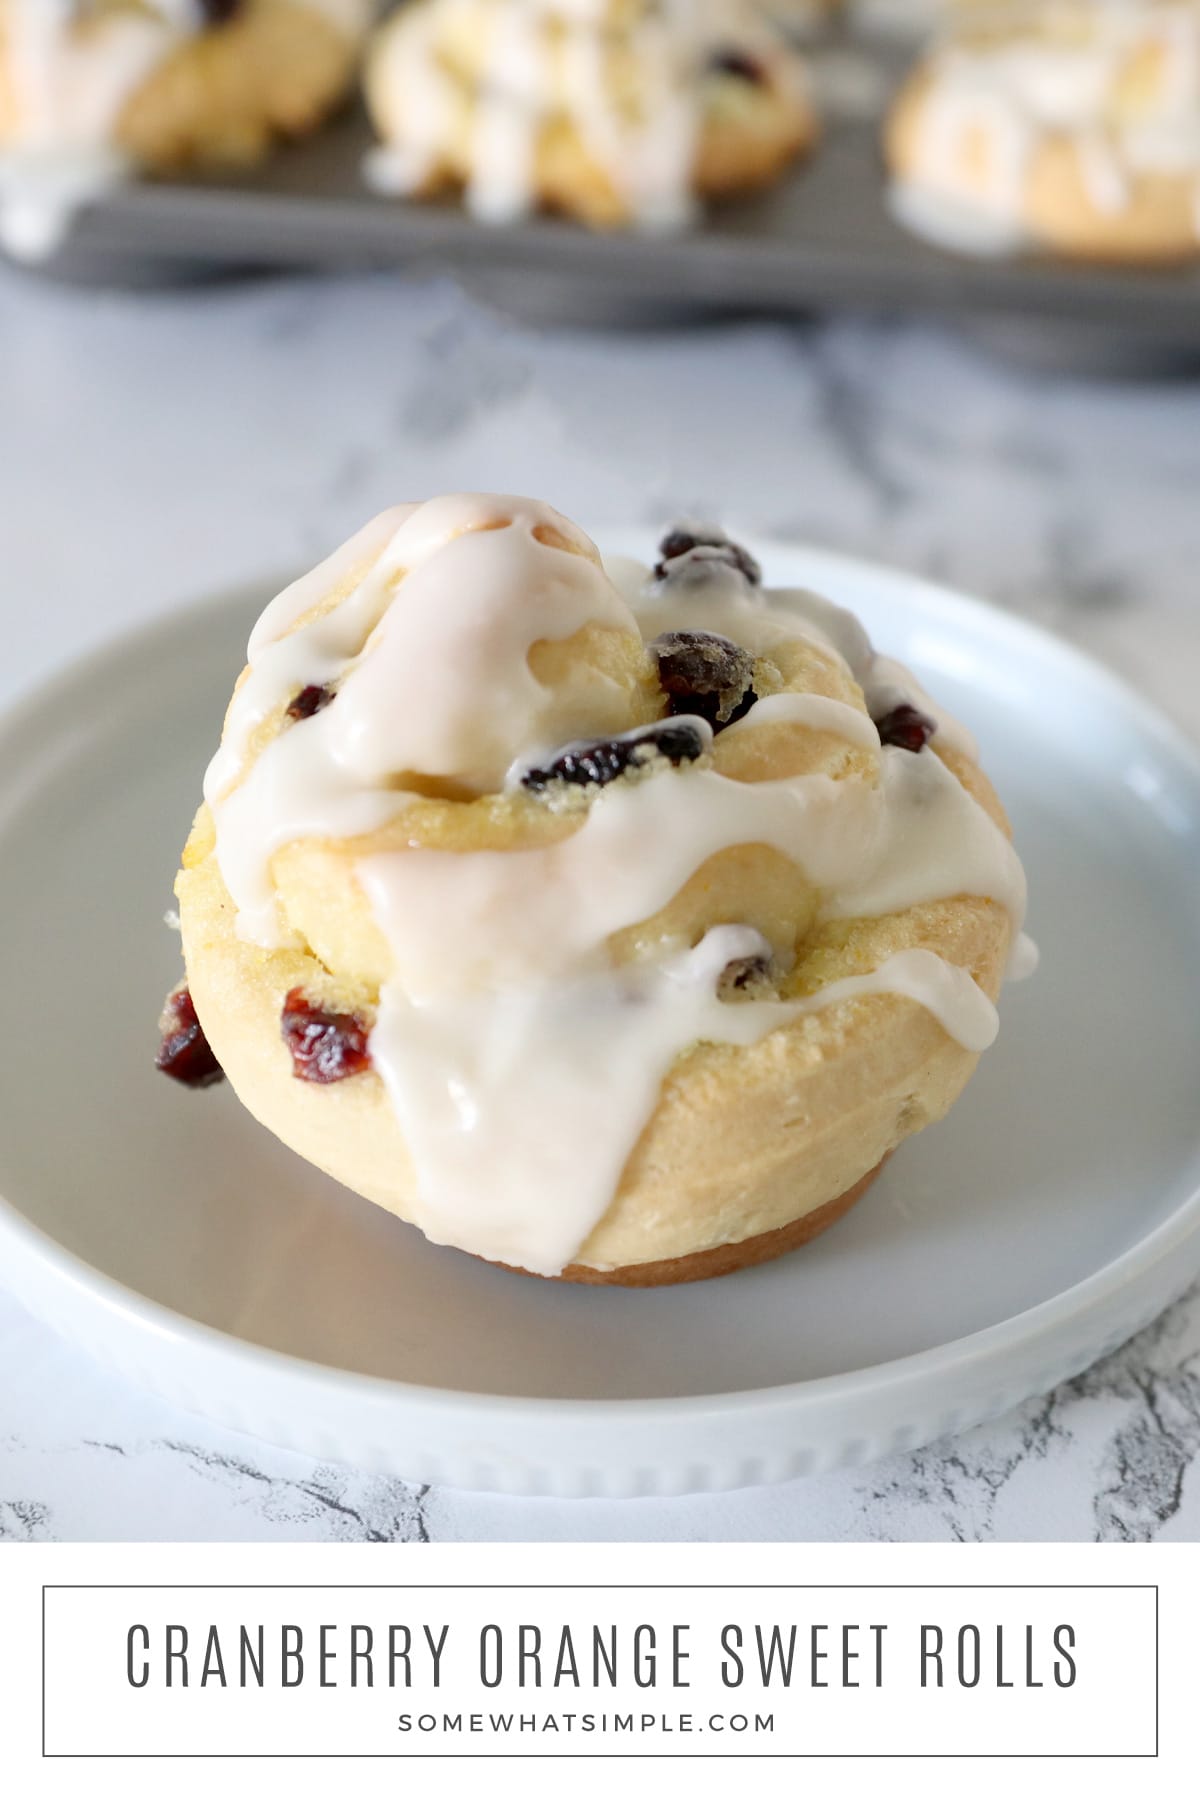 Cranberry Orange Sweet Rolls will make your holiday season a whole lot sweeter! This easy recipe can be made in less than an hour and the rolls are absolutely DELICIOUS! via @somewhatsimple